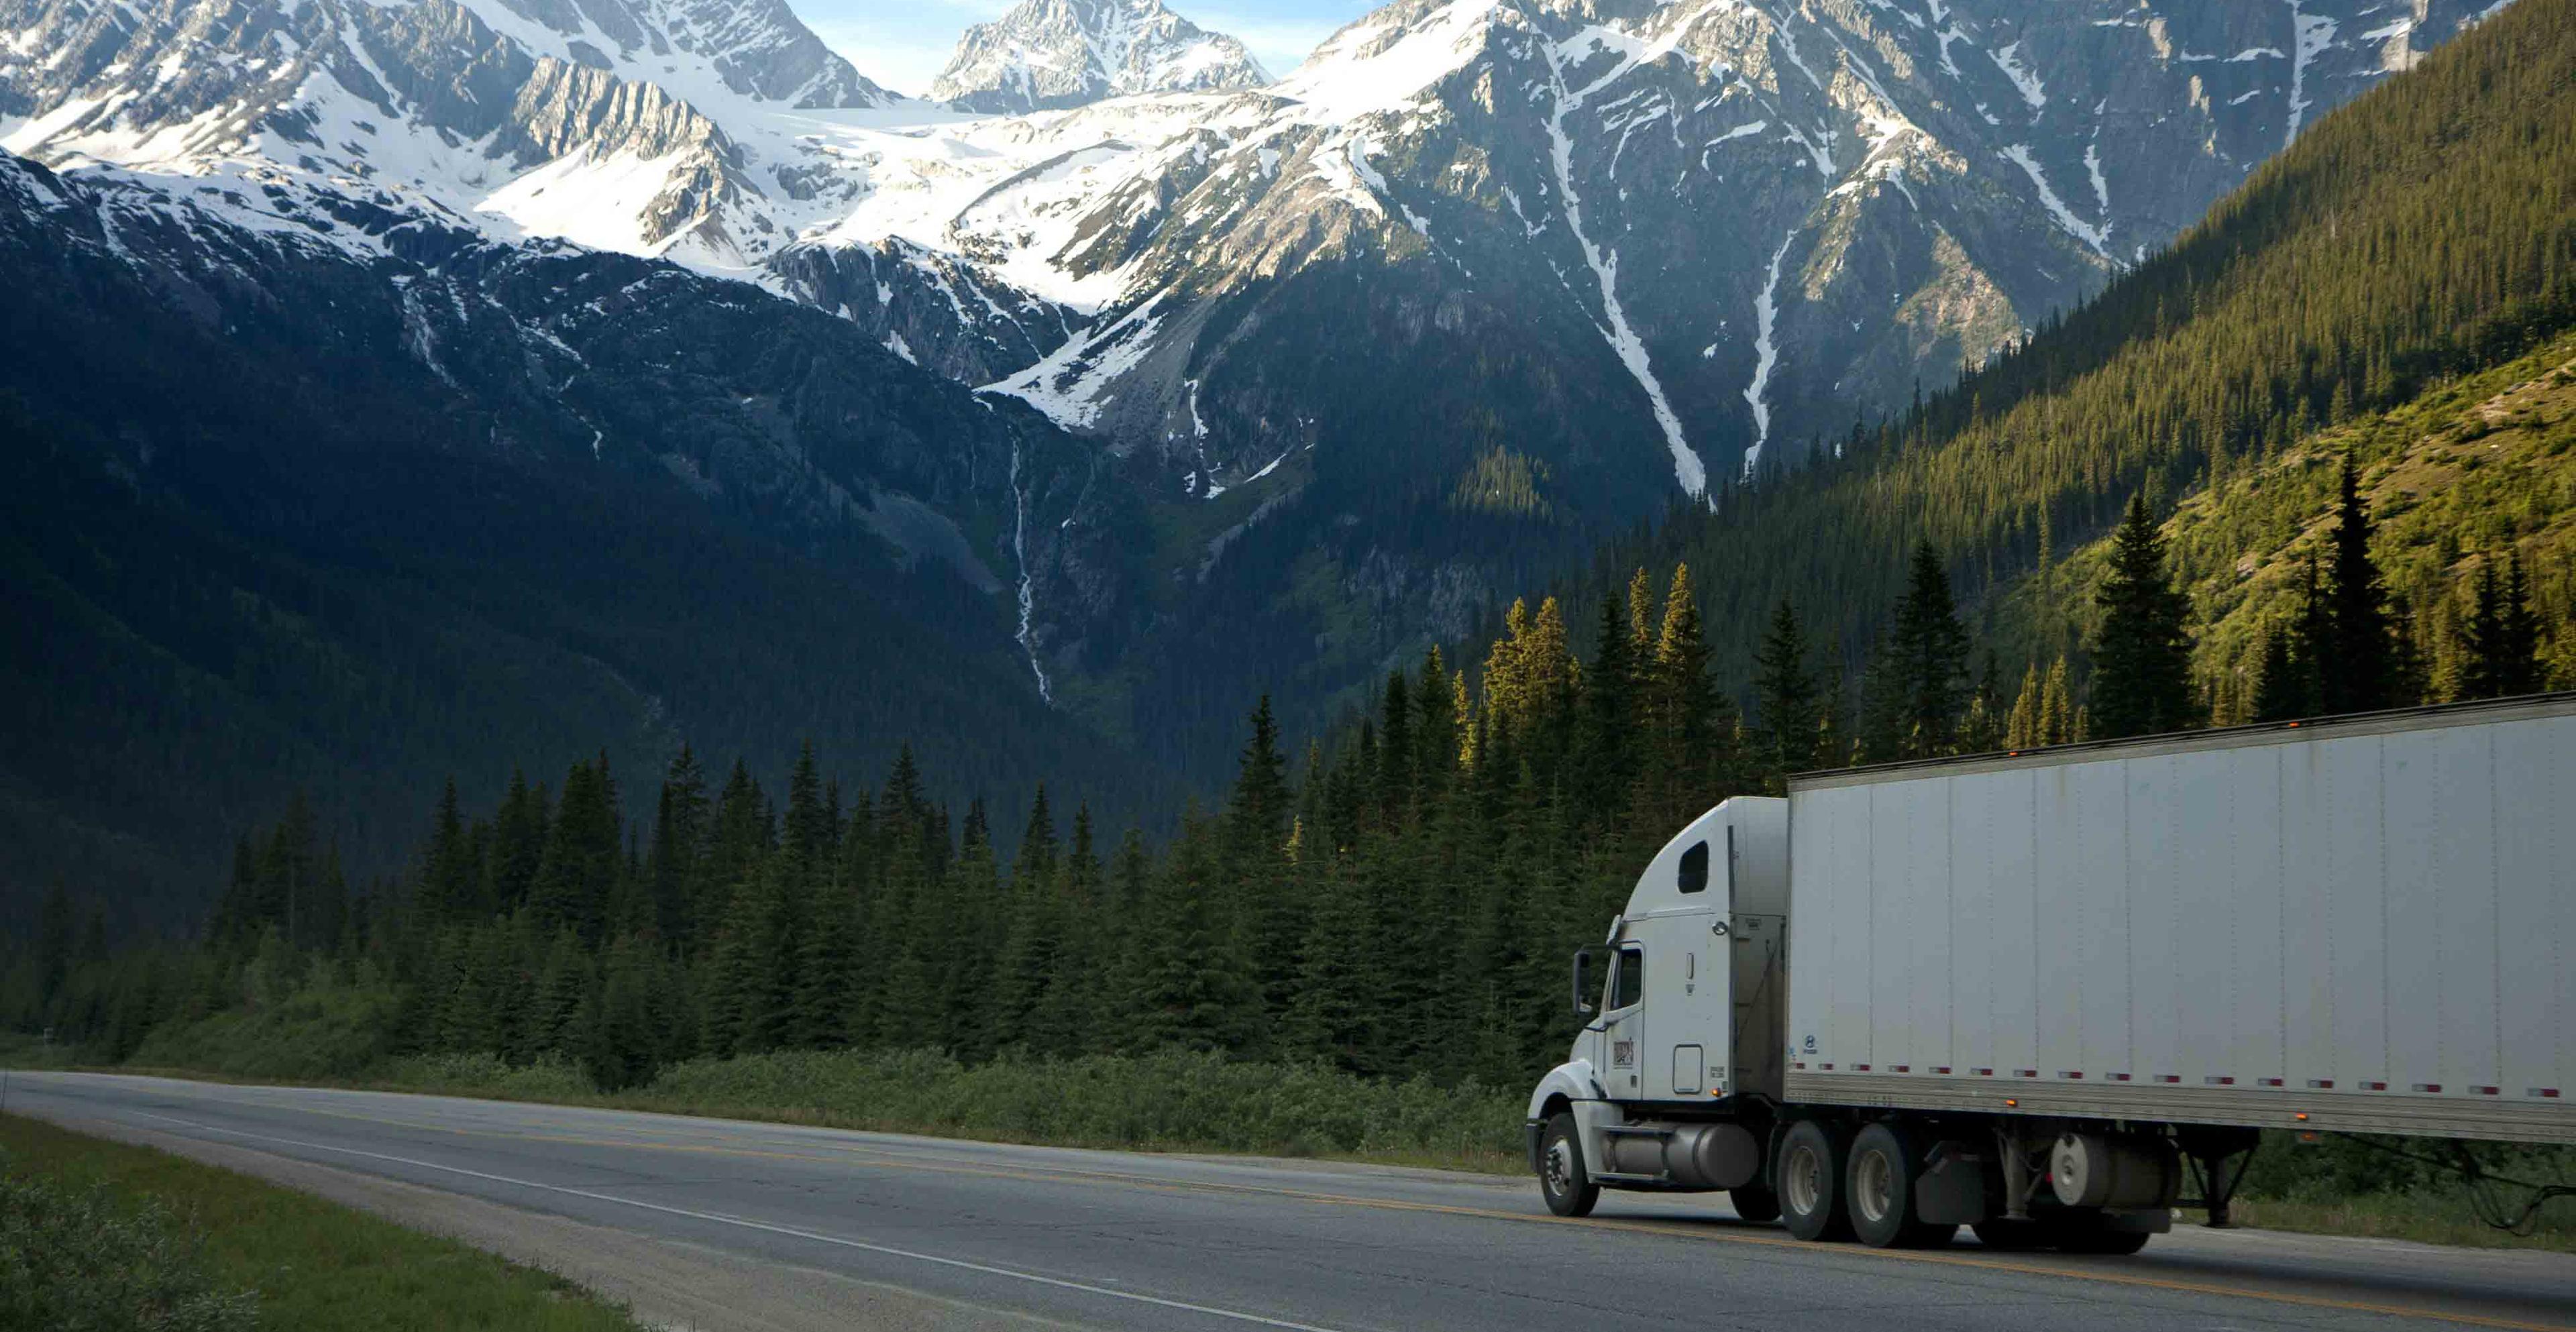 A white truck driving on the road with mountains in the background